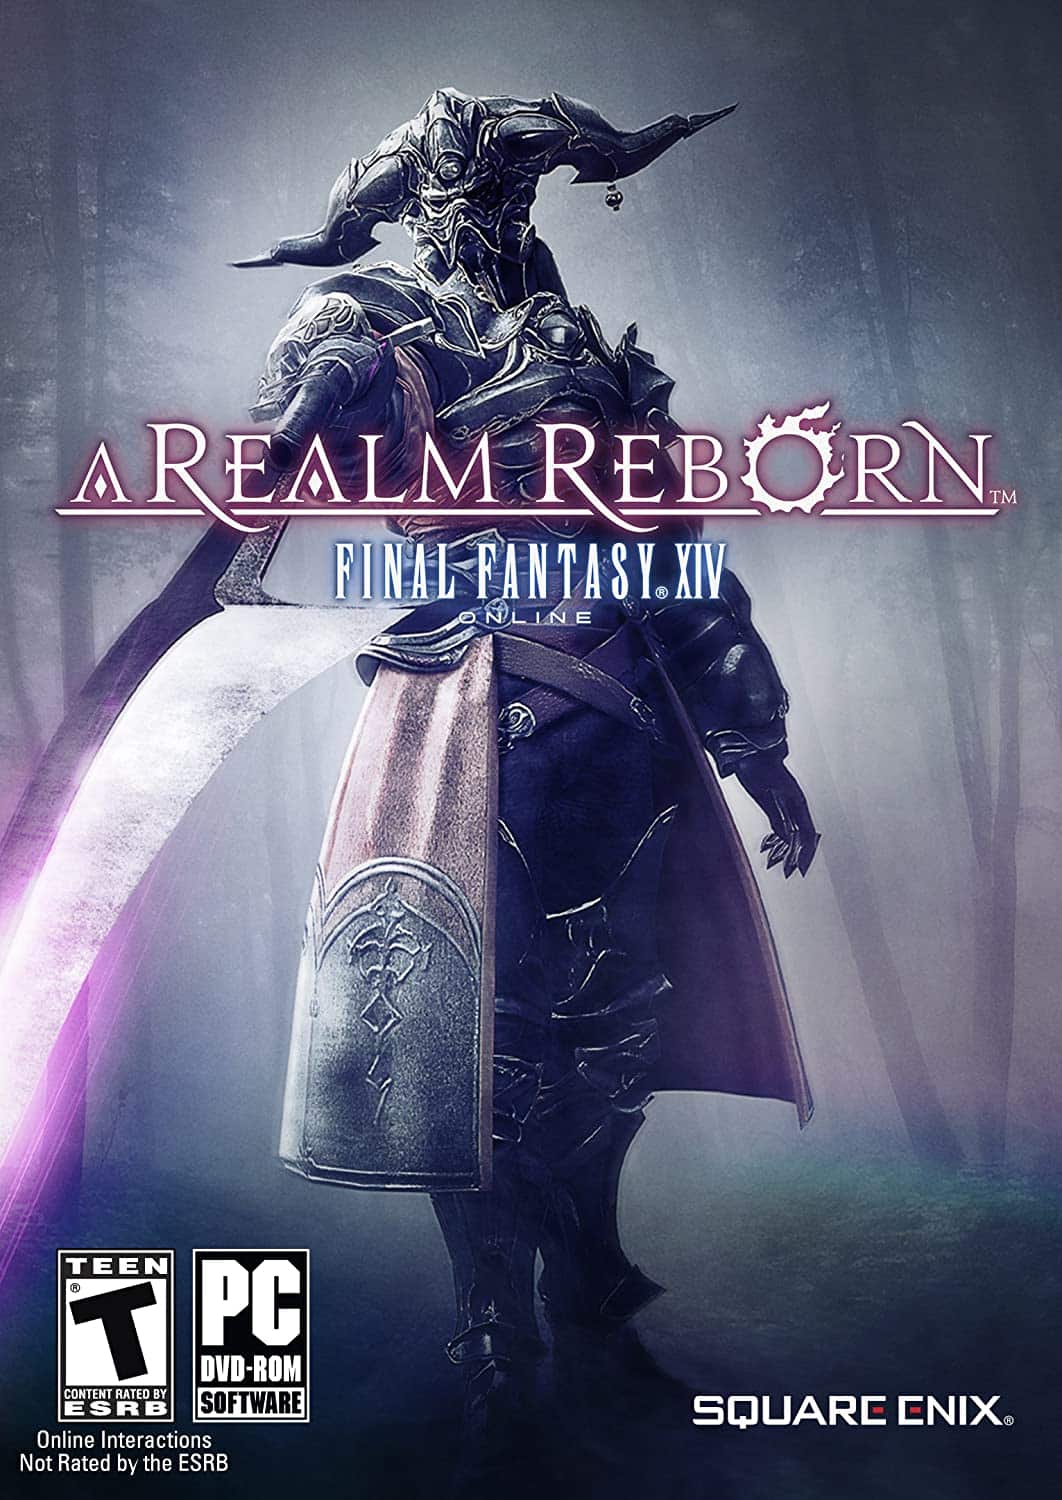 Final Fantasy XIV: A Realm Reborn player count stats